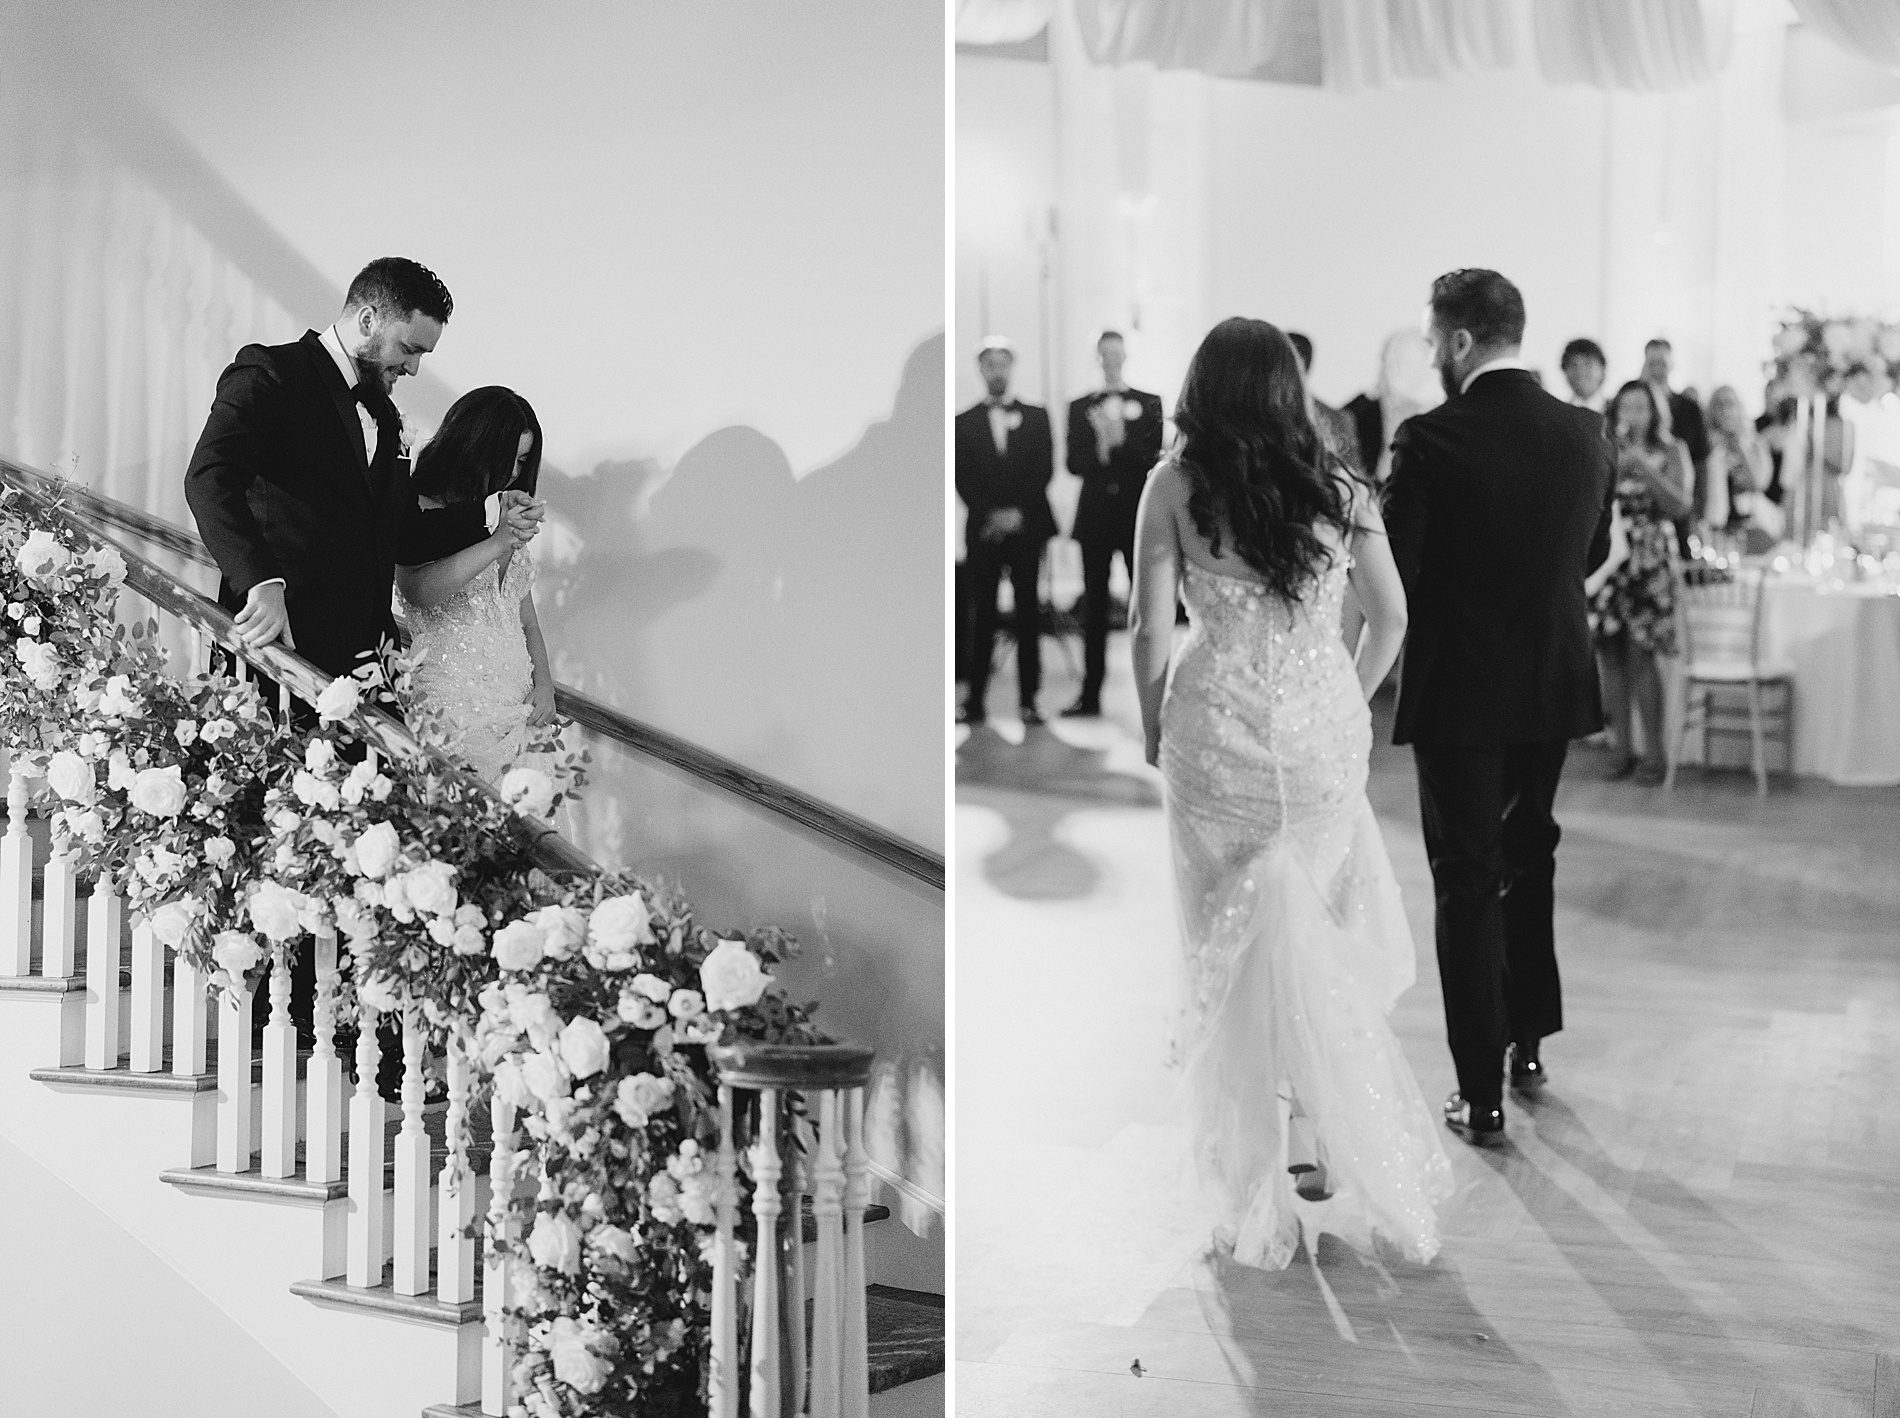 newlyweds walk down grand staircase and enter wedding reception